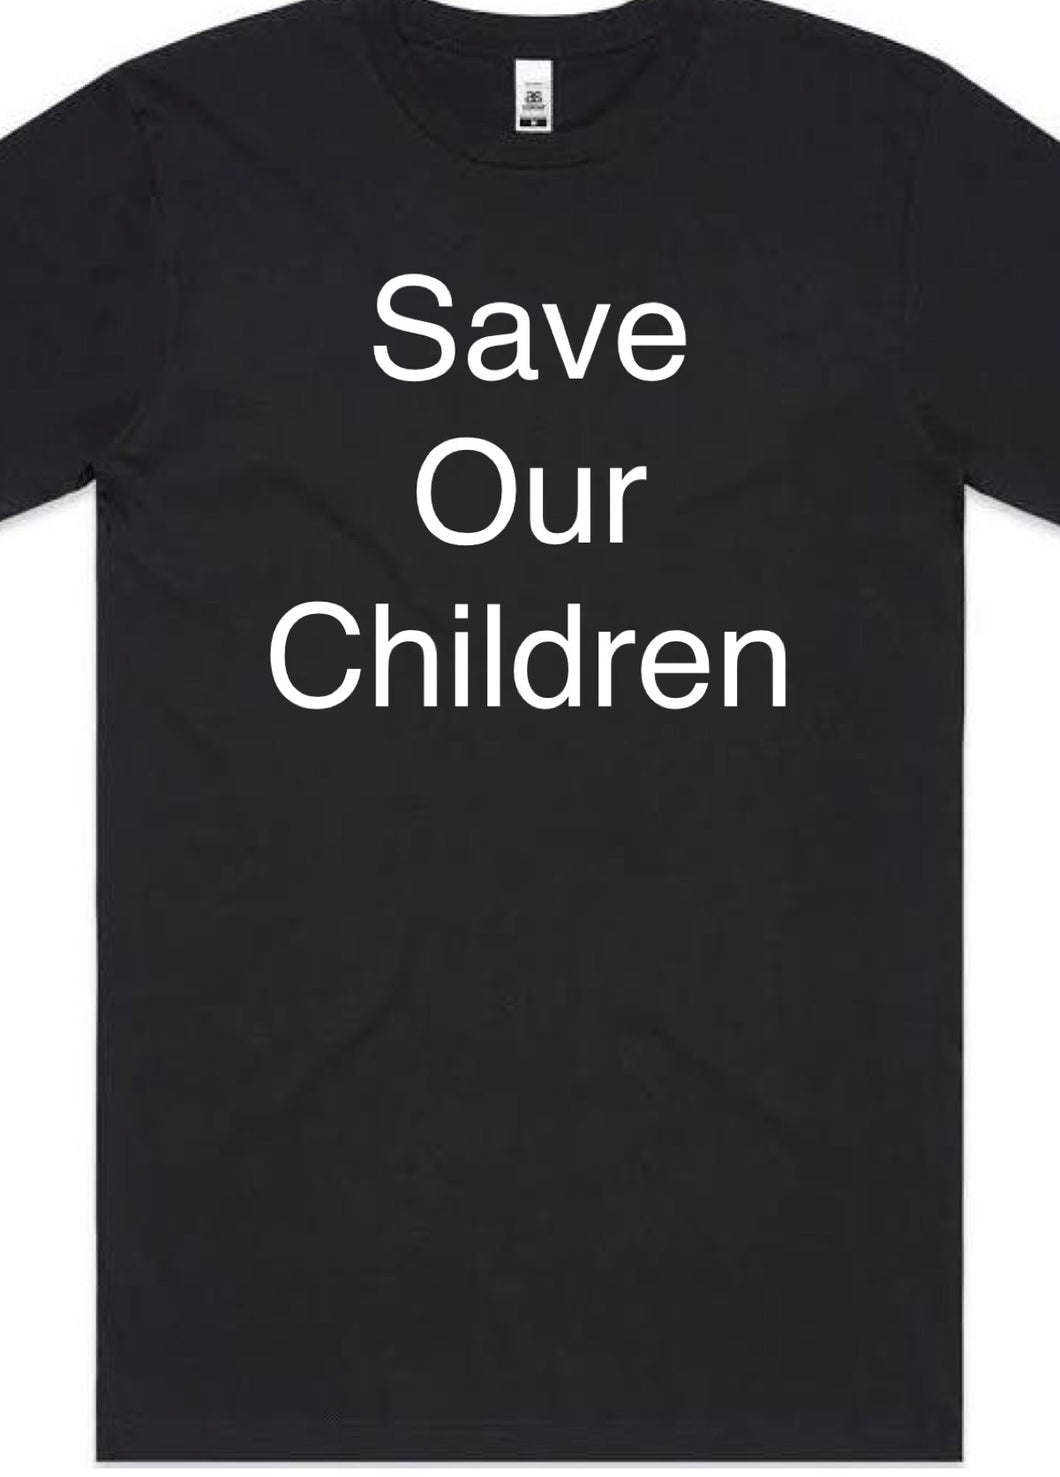 Save our children tee